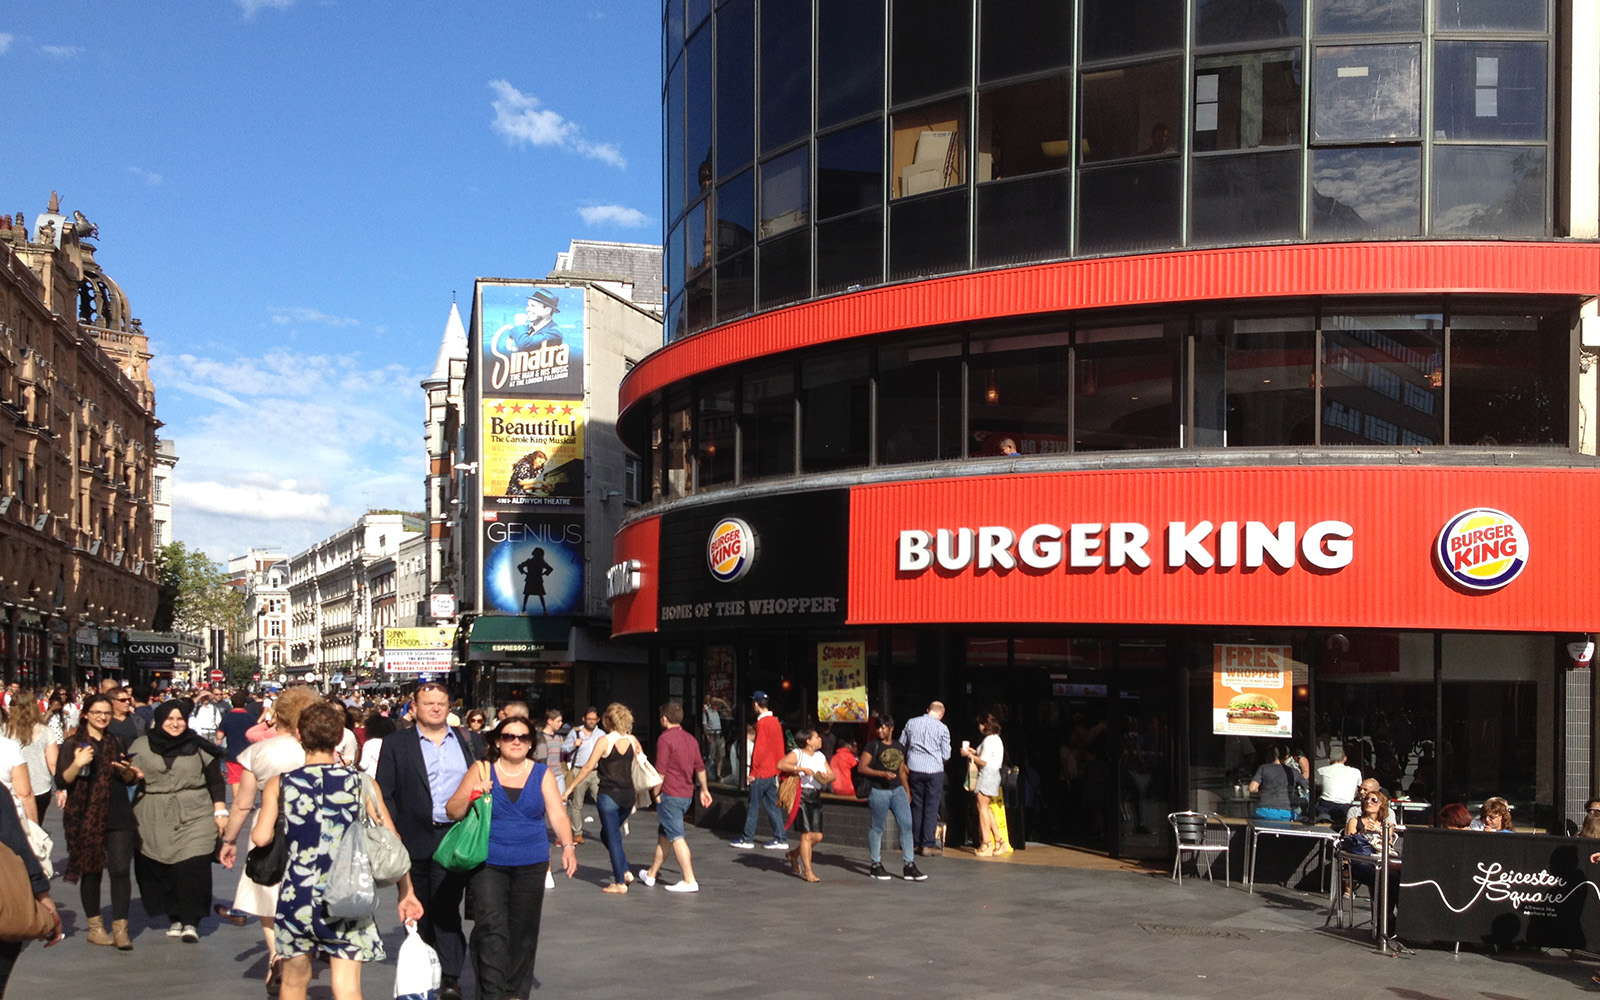 Leicester Square, 23 August 2015